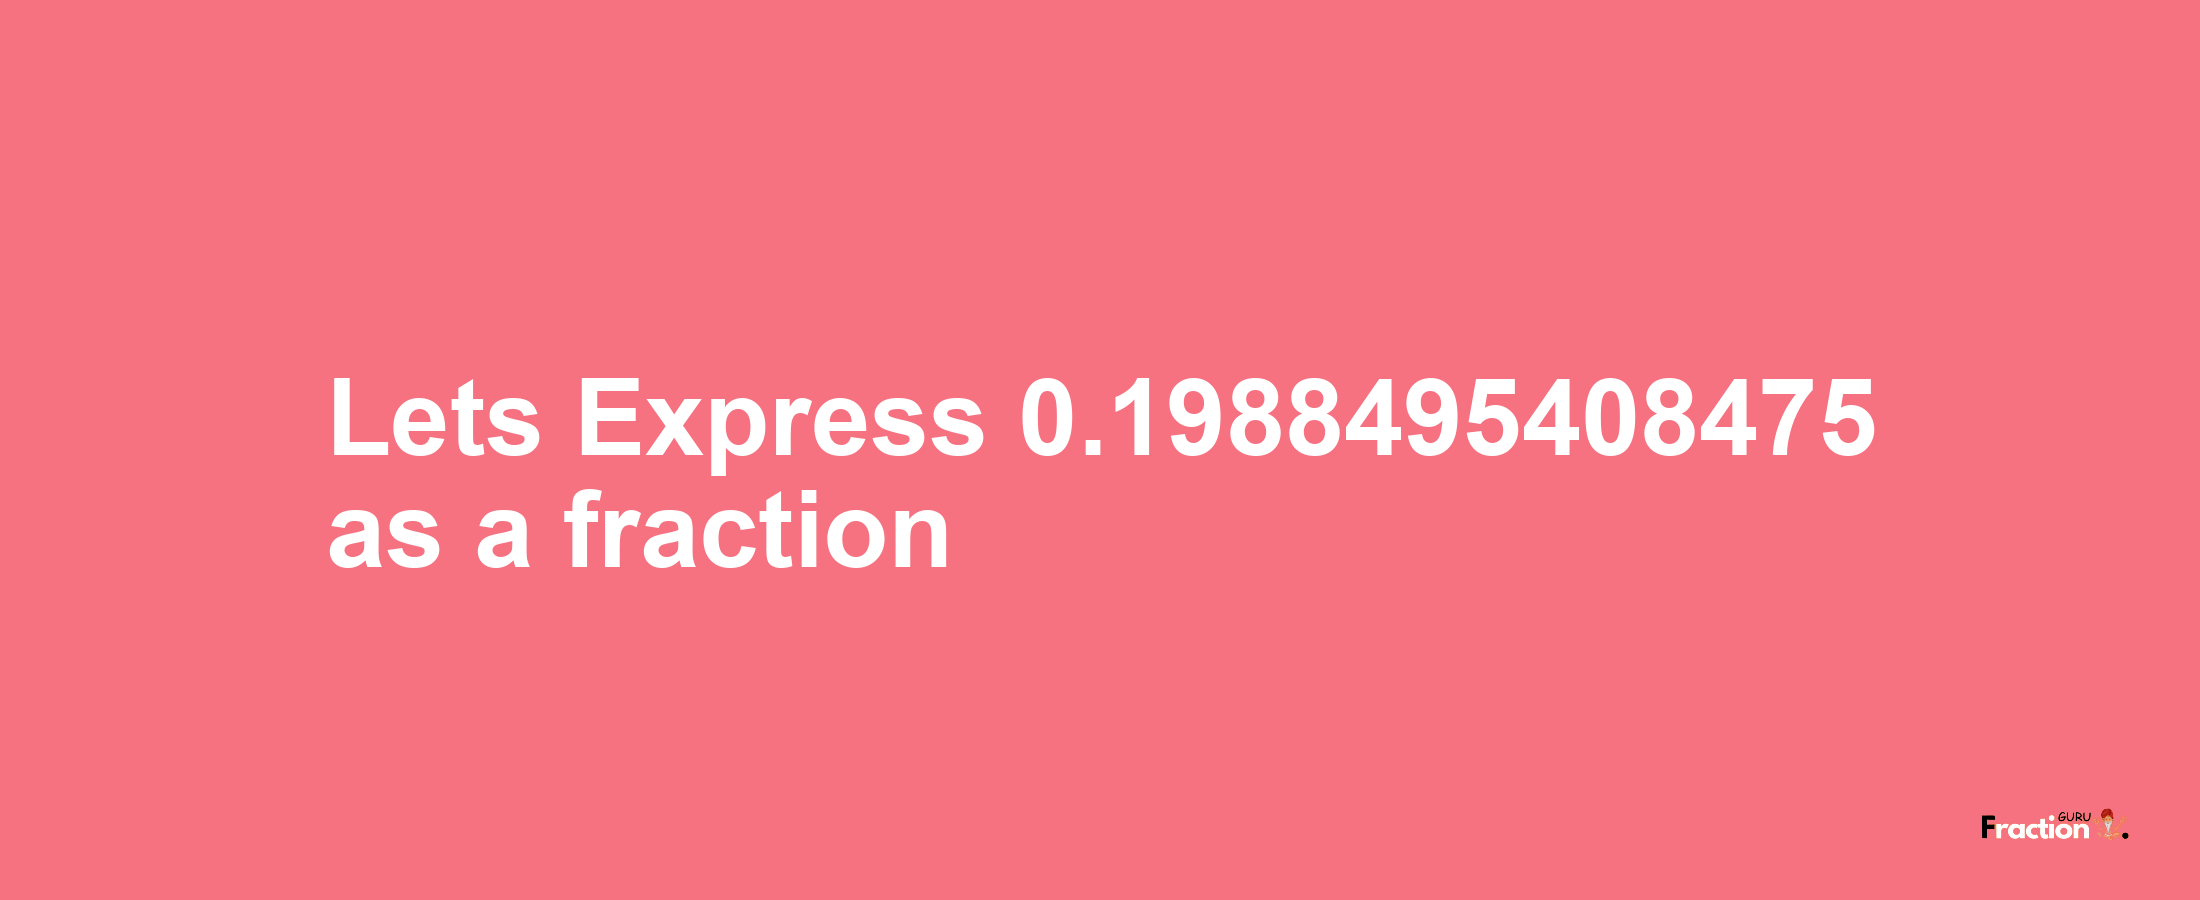 Lets Express 0.1988495408475 as afraction